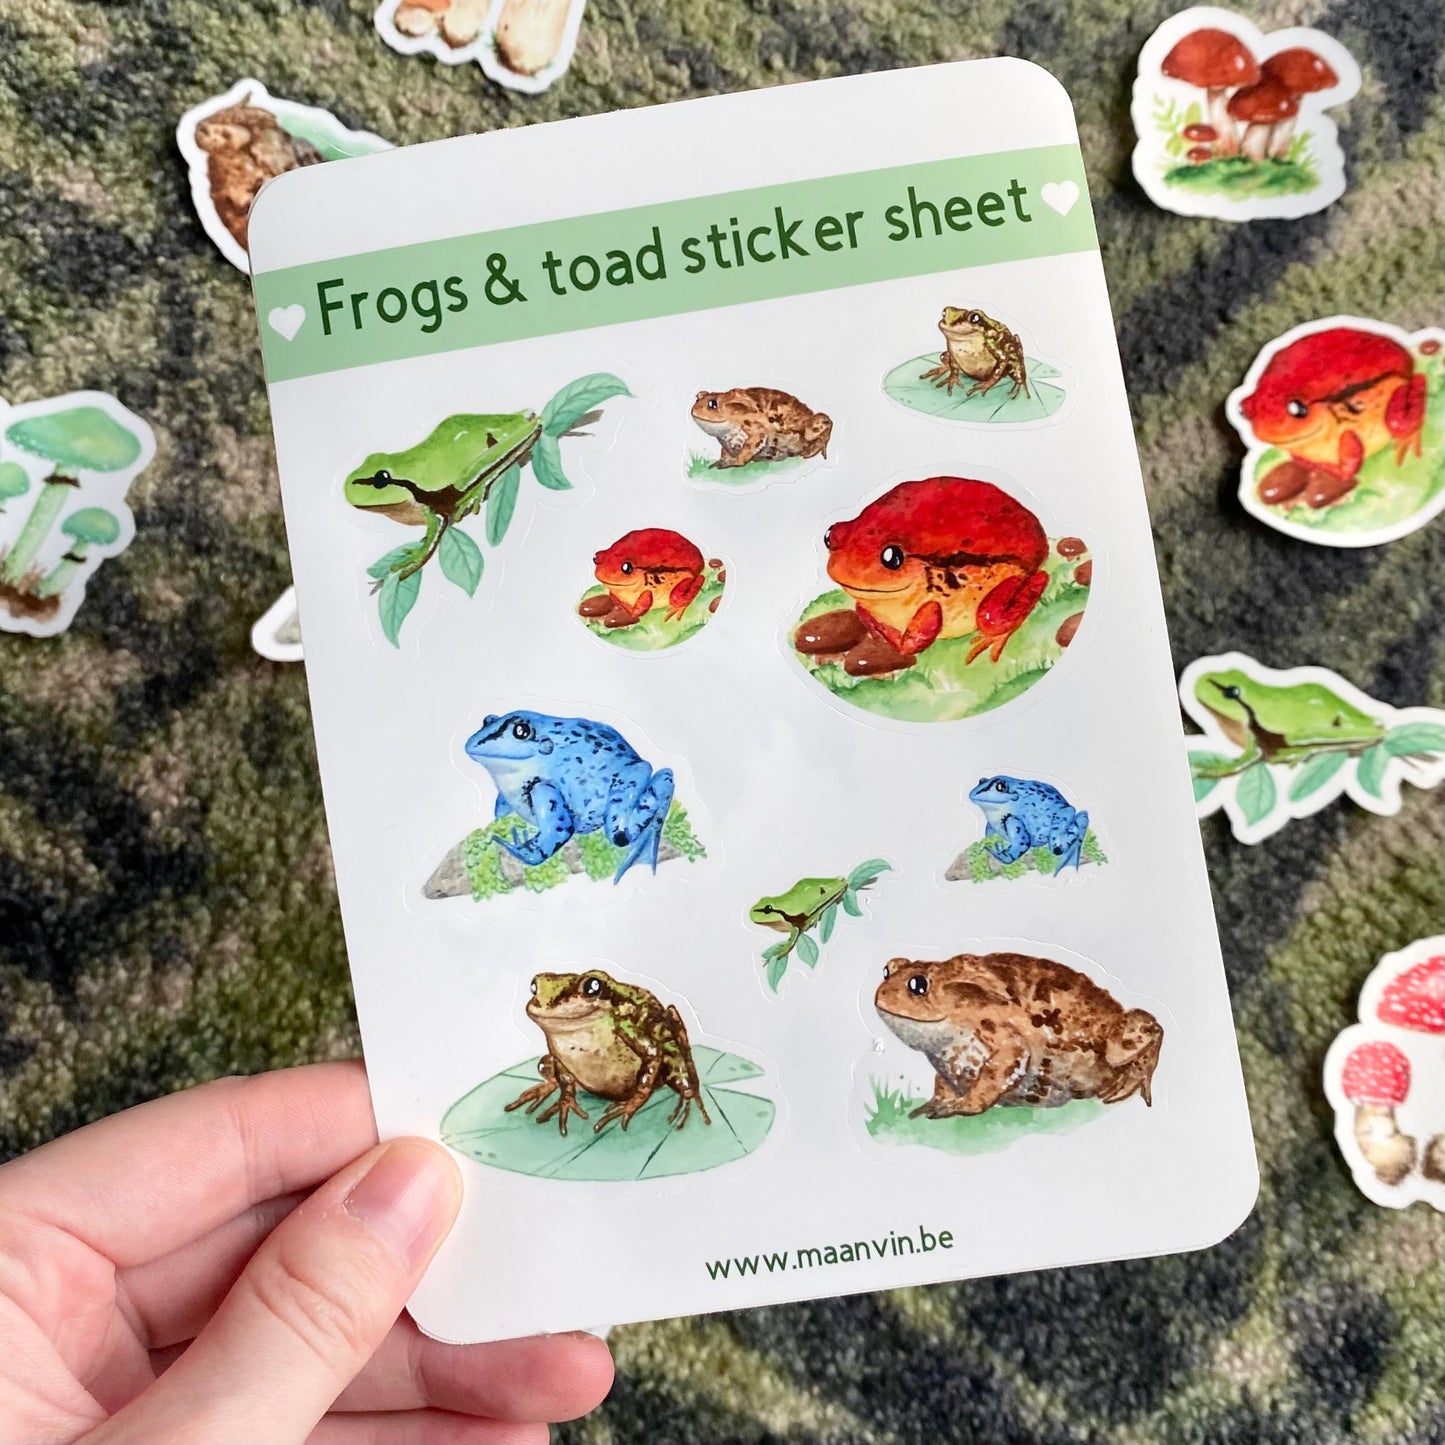 Frogs & toad sticker sheet